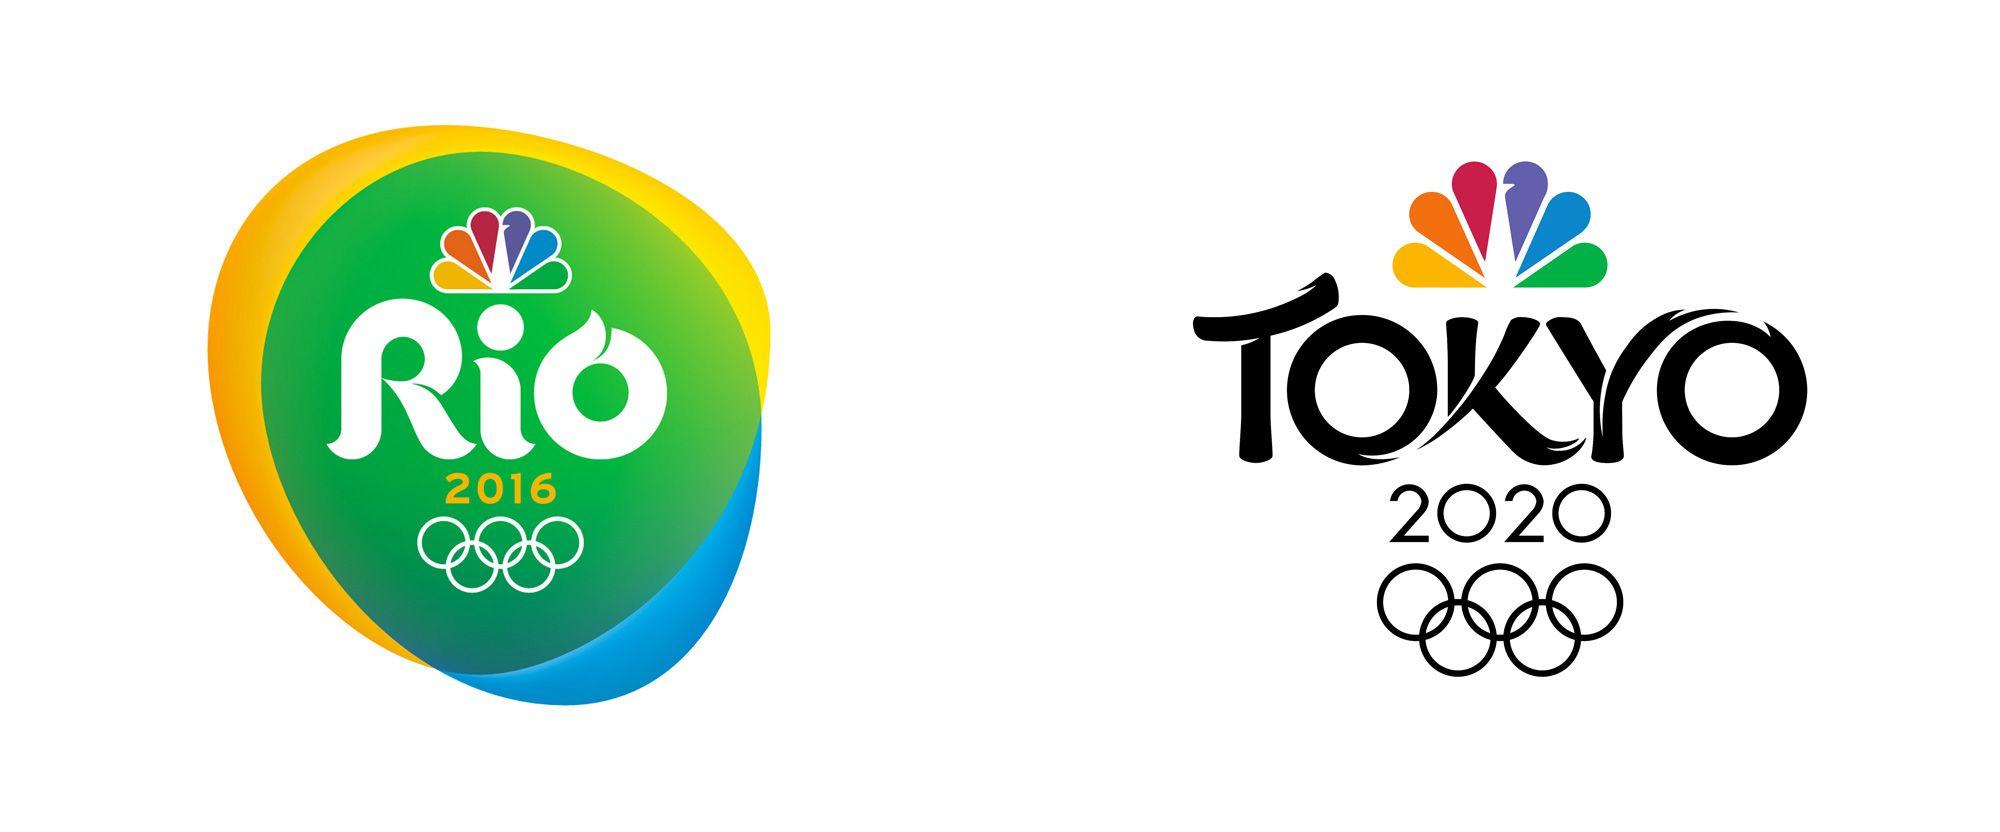 Nbcolympics.com Logo - Brand New: New Logo for NBC Olympics 2020 Broadcast by Mocean